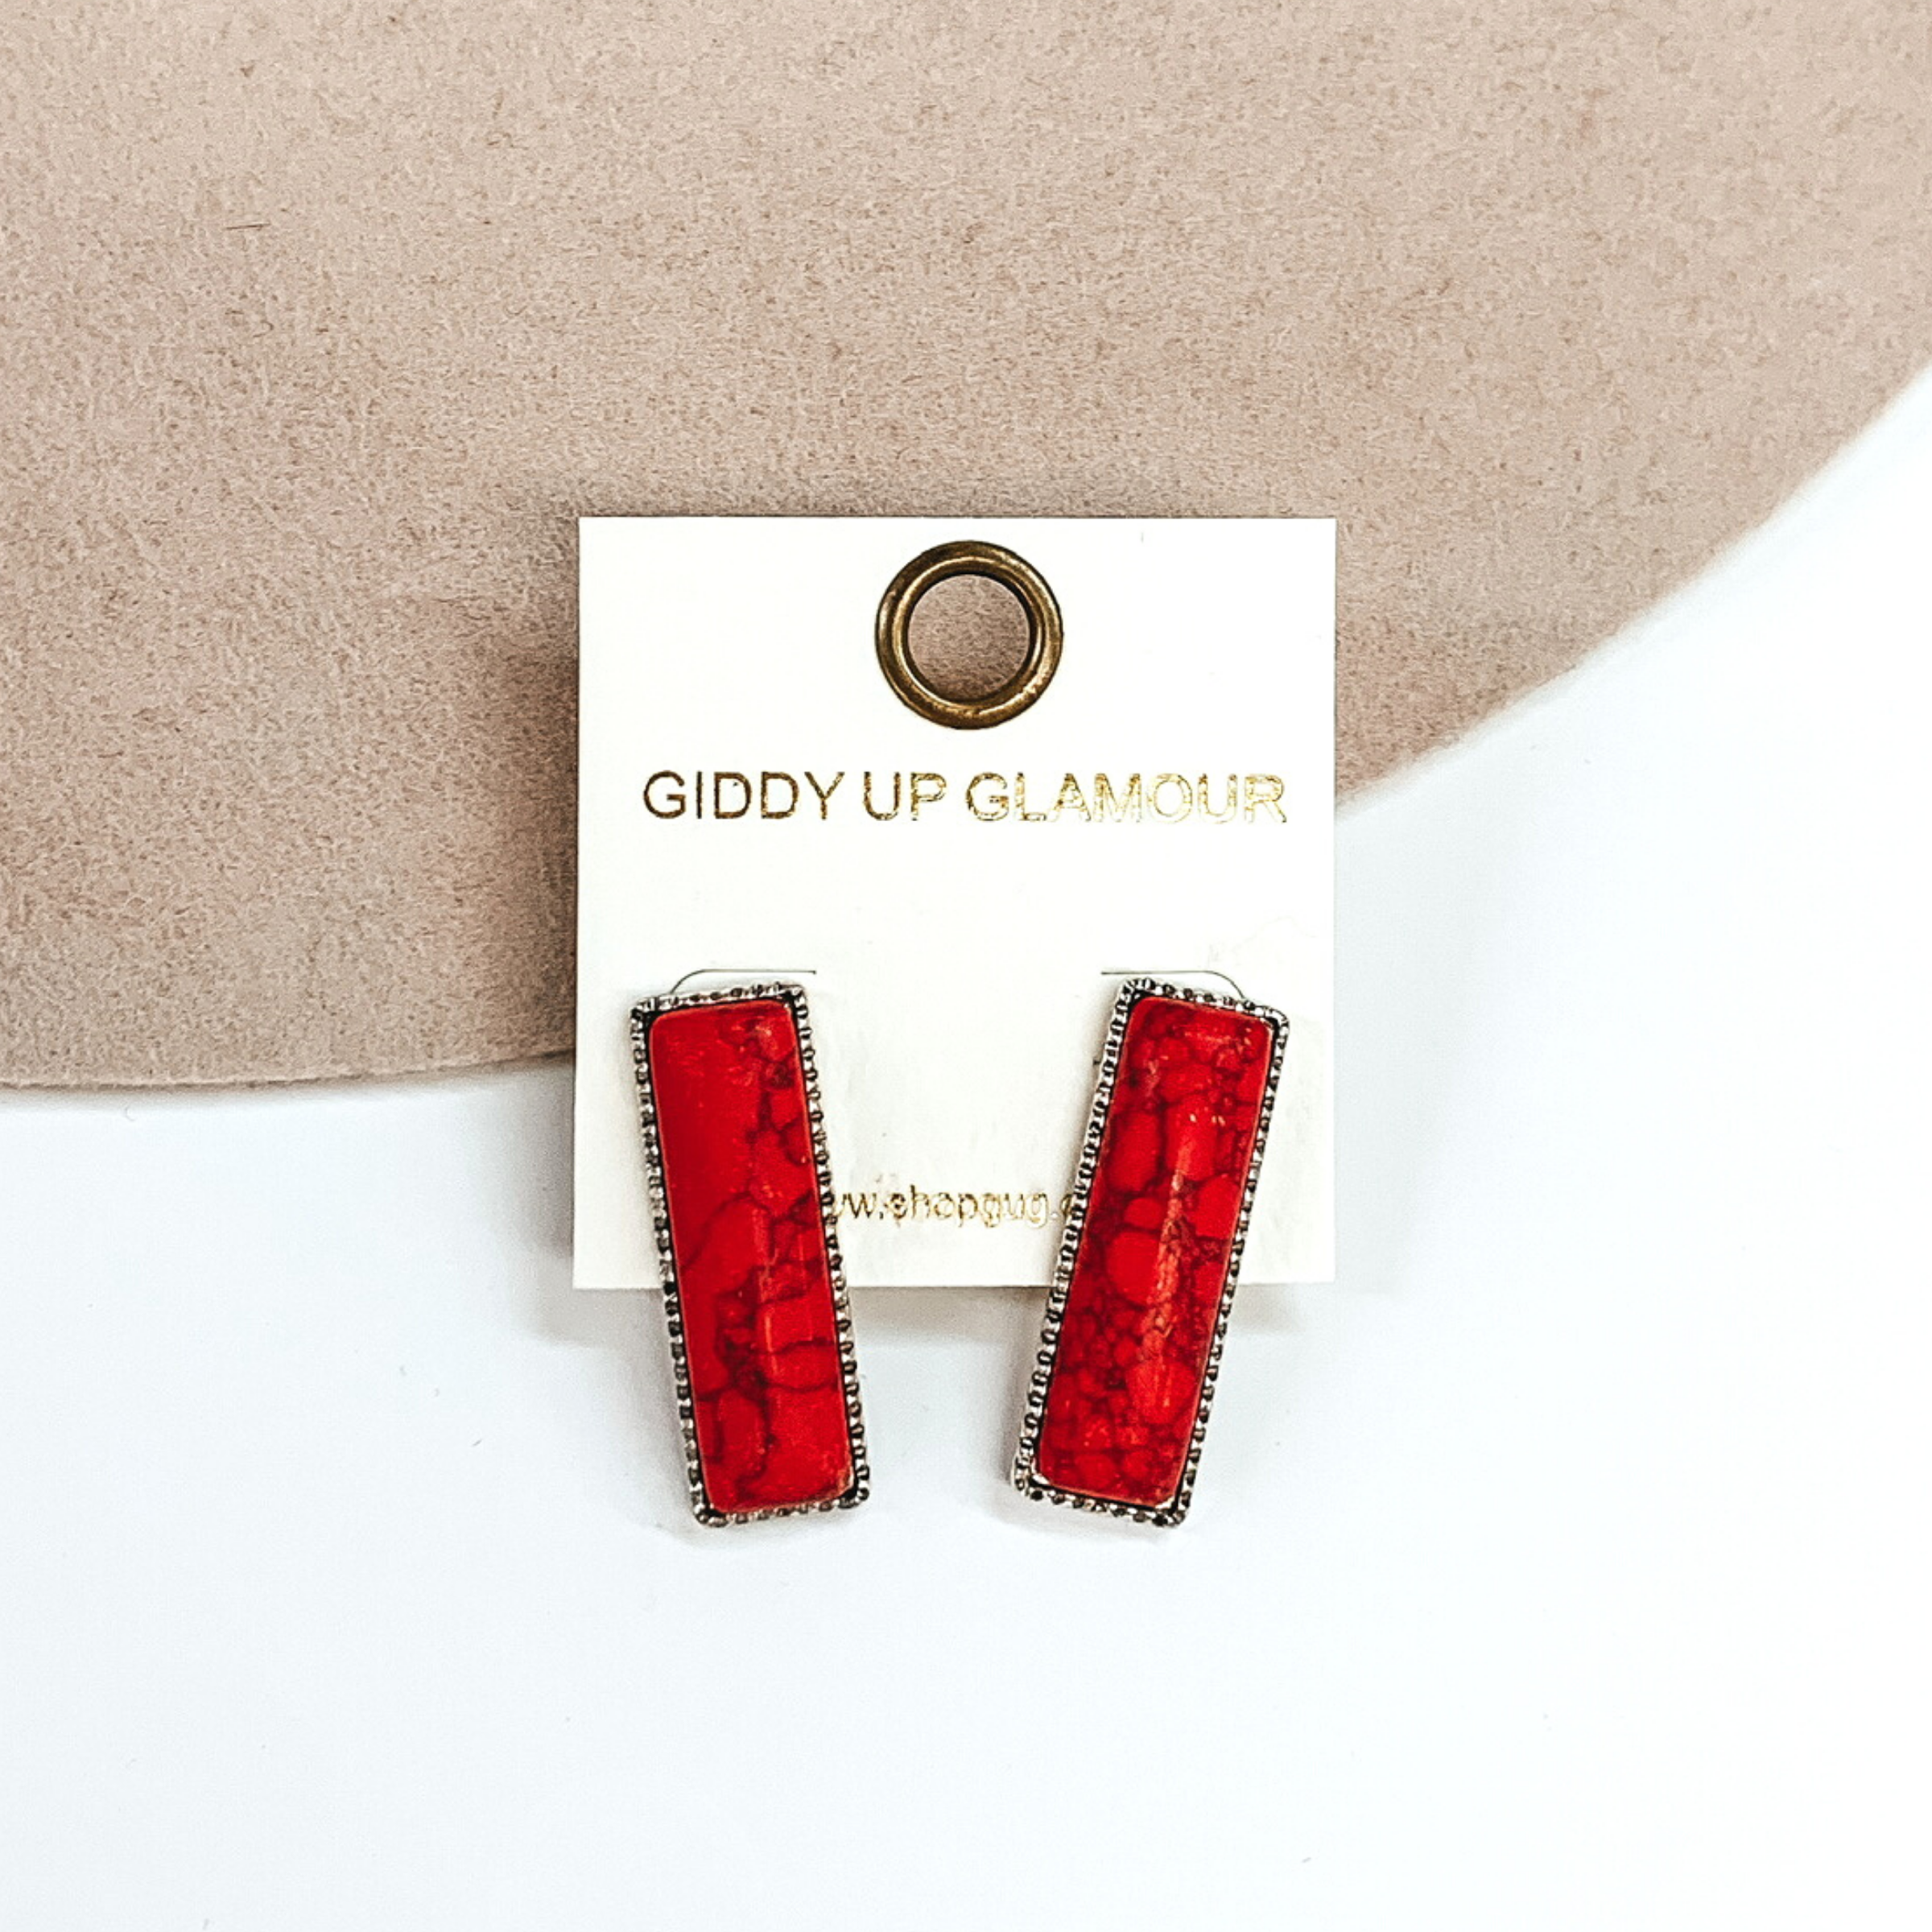 Silver rectangle earrings with a red rectangle stone. These earrings are pictured on a white and beige background. 